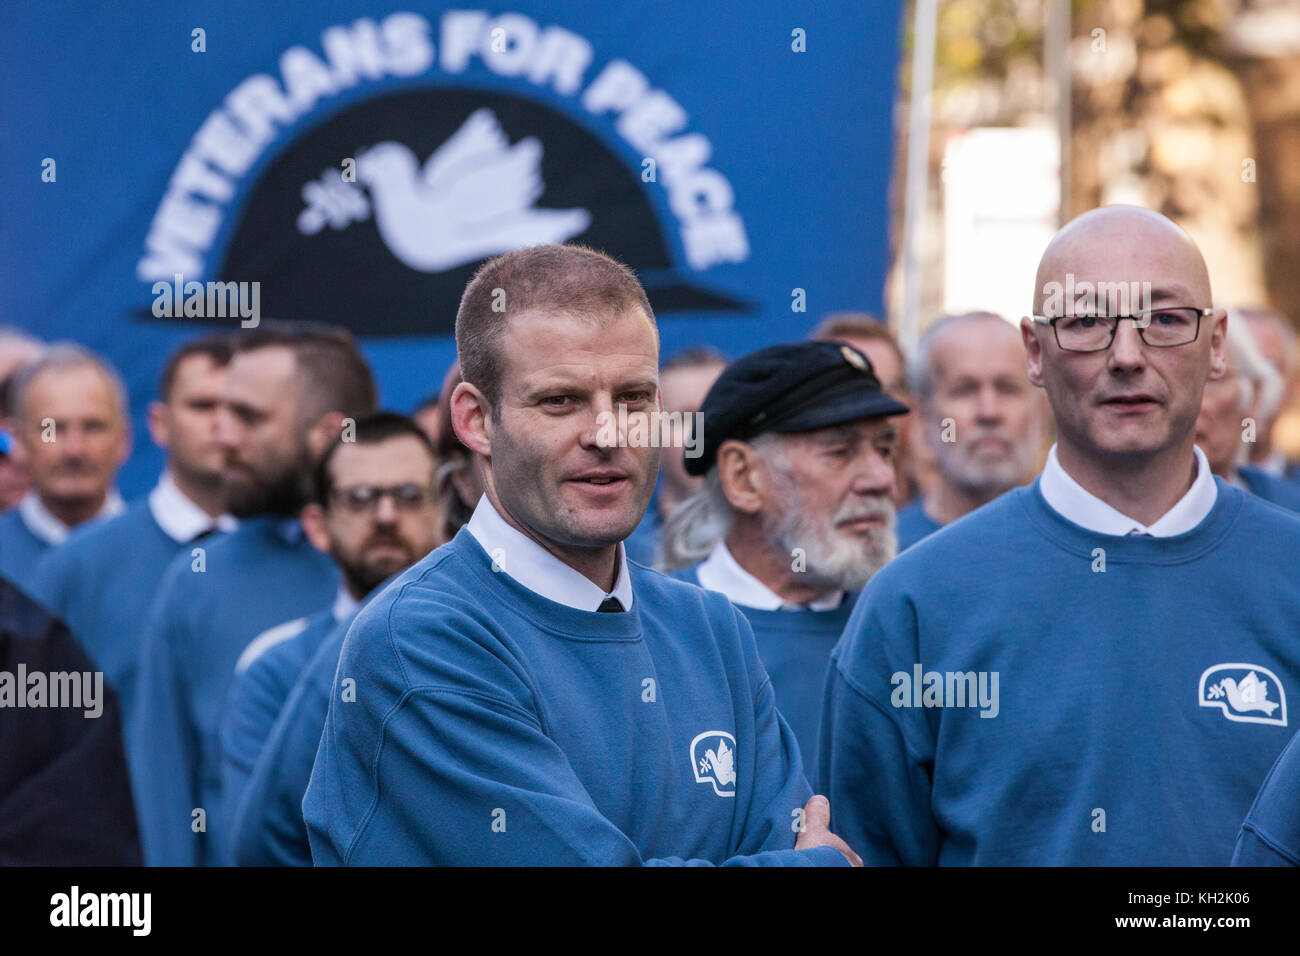 London, UK. 12th November, 2017. Ben Griffin (c), ex-SAS soldier and coordinator of Veterans For Peace UK, organises ex-services men and women from Veterans For Peace UK (VFP UK) preparing to walk to the Cenotaph on Remembrance Sunday. VFP UK was founded in 2011 and works to influence the foreign and defence policy of the UK for the larger purpose of world peace. Credit: Mark Kerrison/Alamy Live News Stock Photo